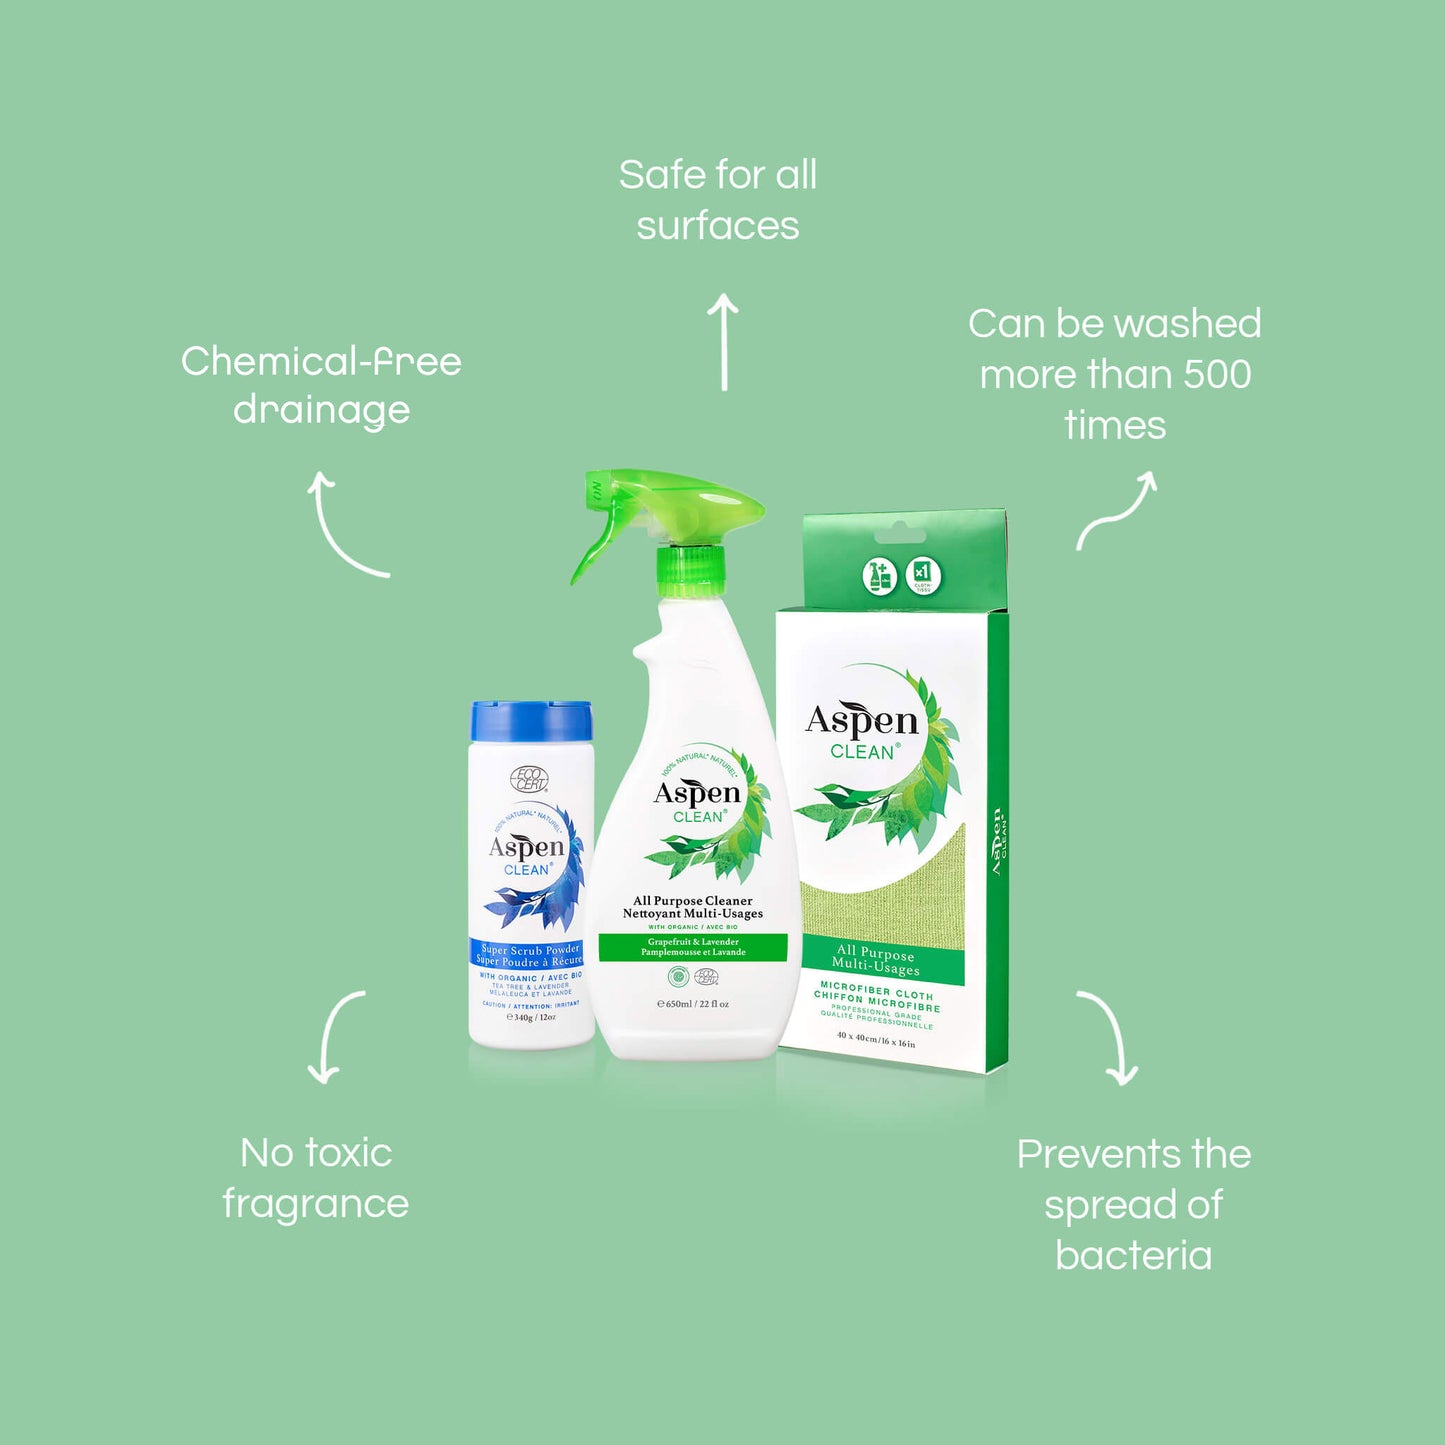 All Purpose Cleaning Kit With Scouring Powder Features: wash 500 times, safe, chemical free, scratch free & non toxic